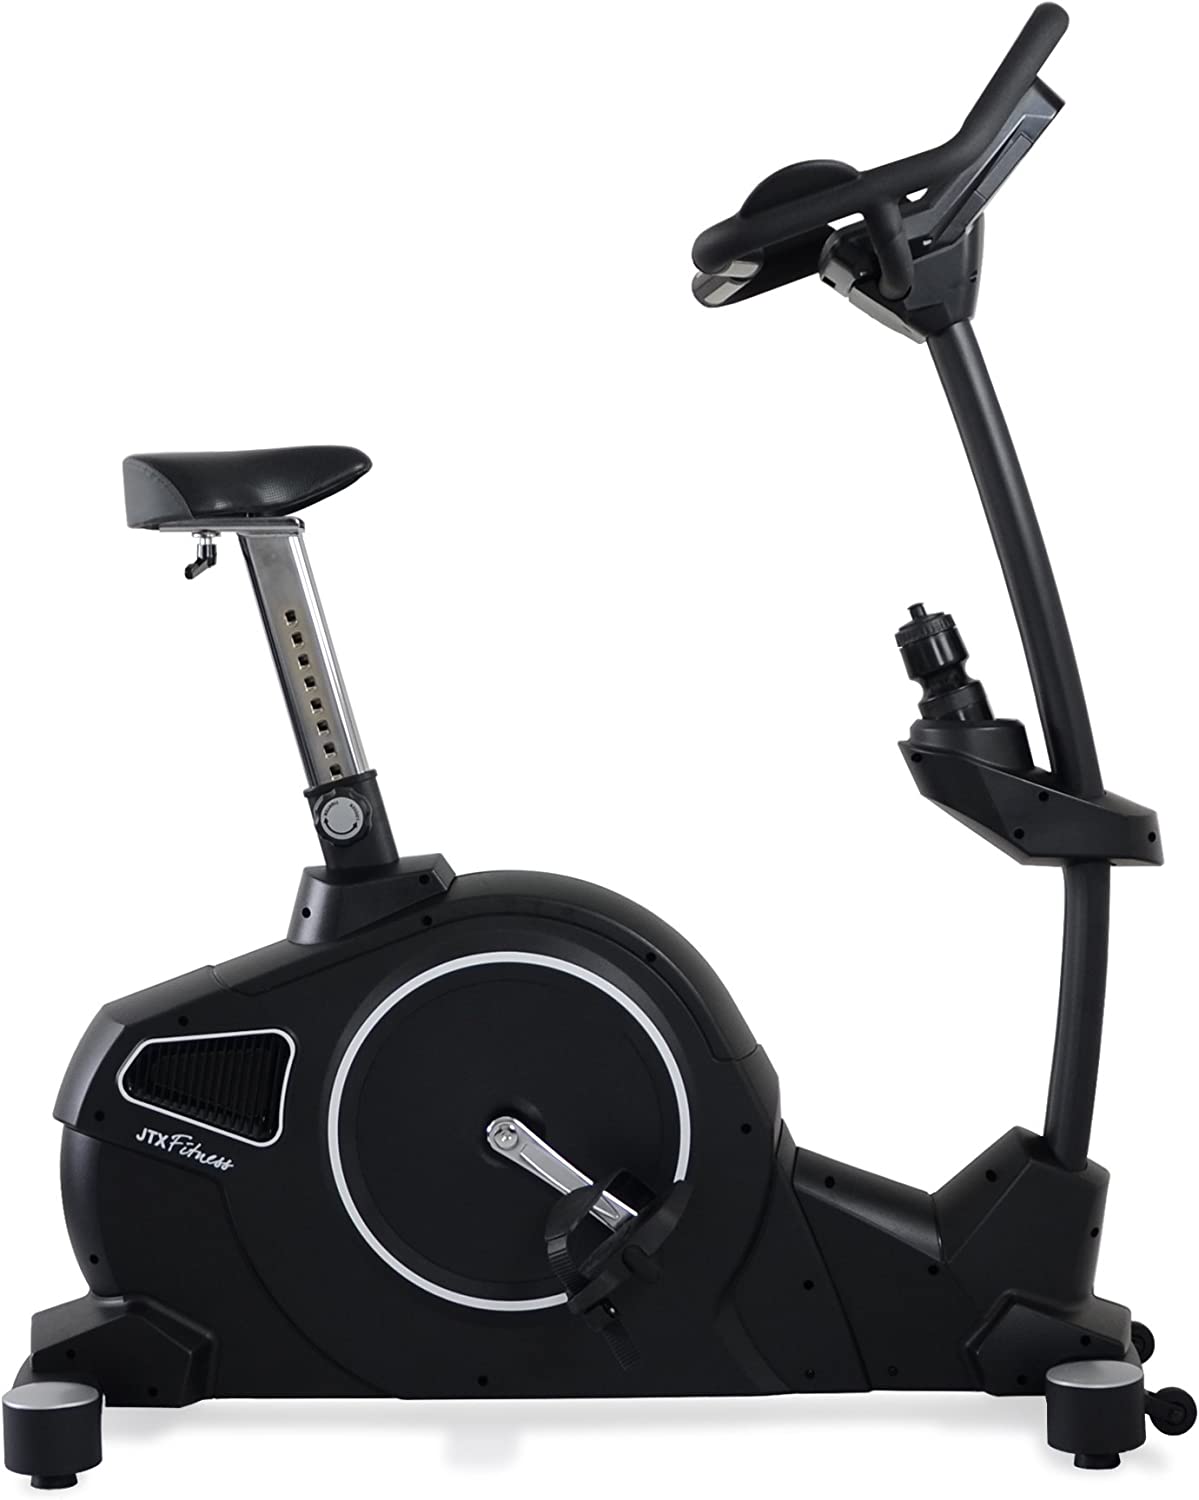 JTX Cyclo-5 Upright Gym Exercise Bike - side view